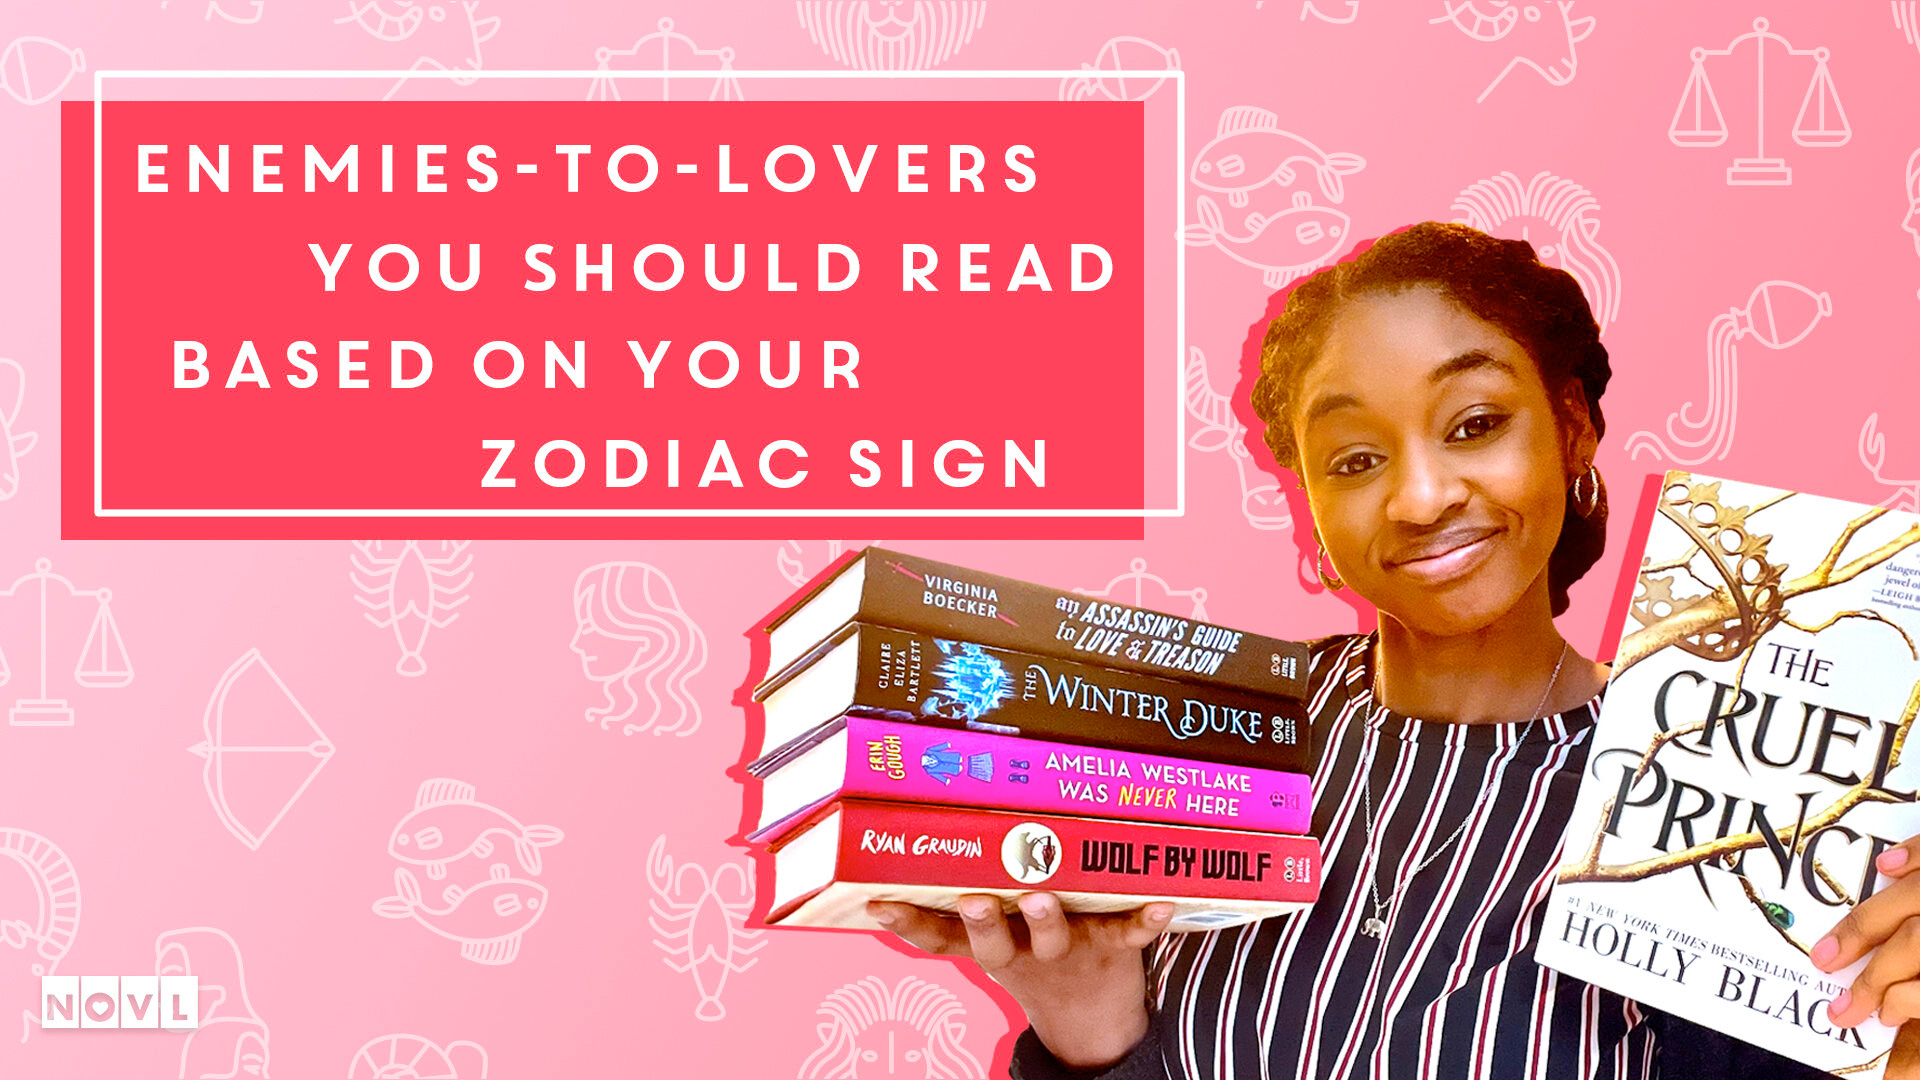 The NOVL Blog, Featured Image for Article: What Enemies-to-Lovers YA you should read for your Zodiac Sign/ry